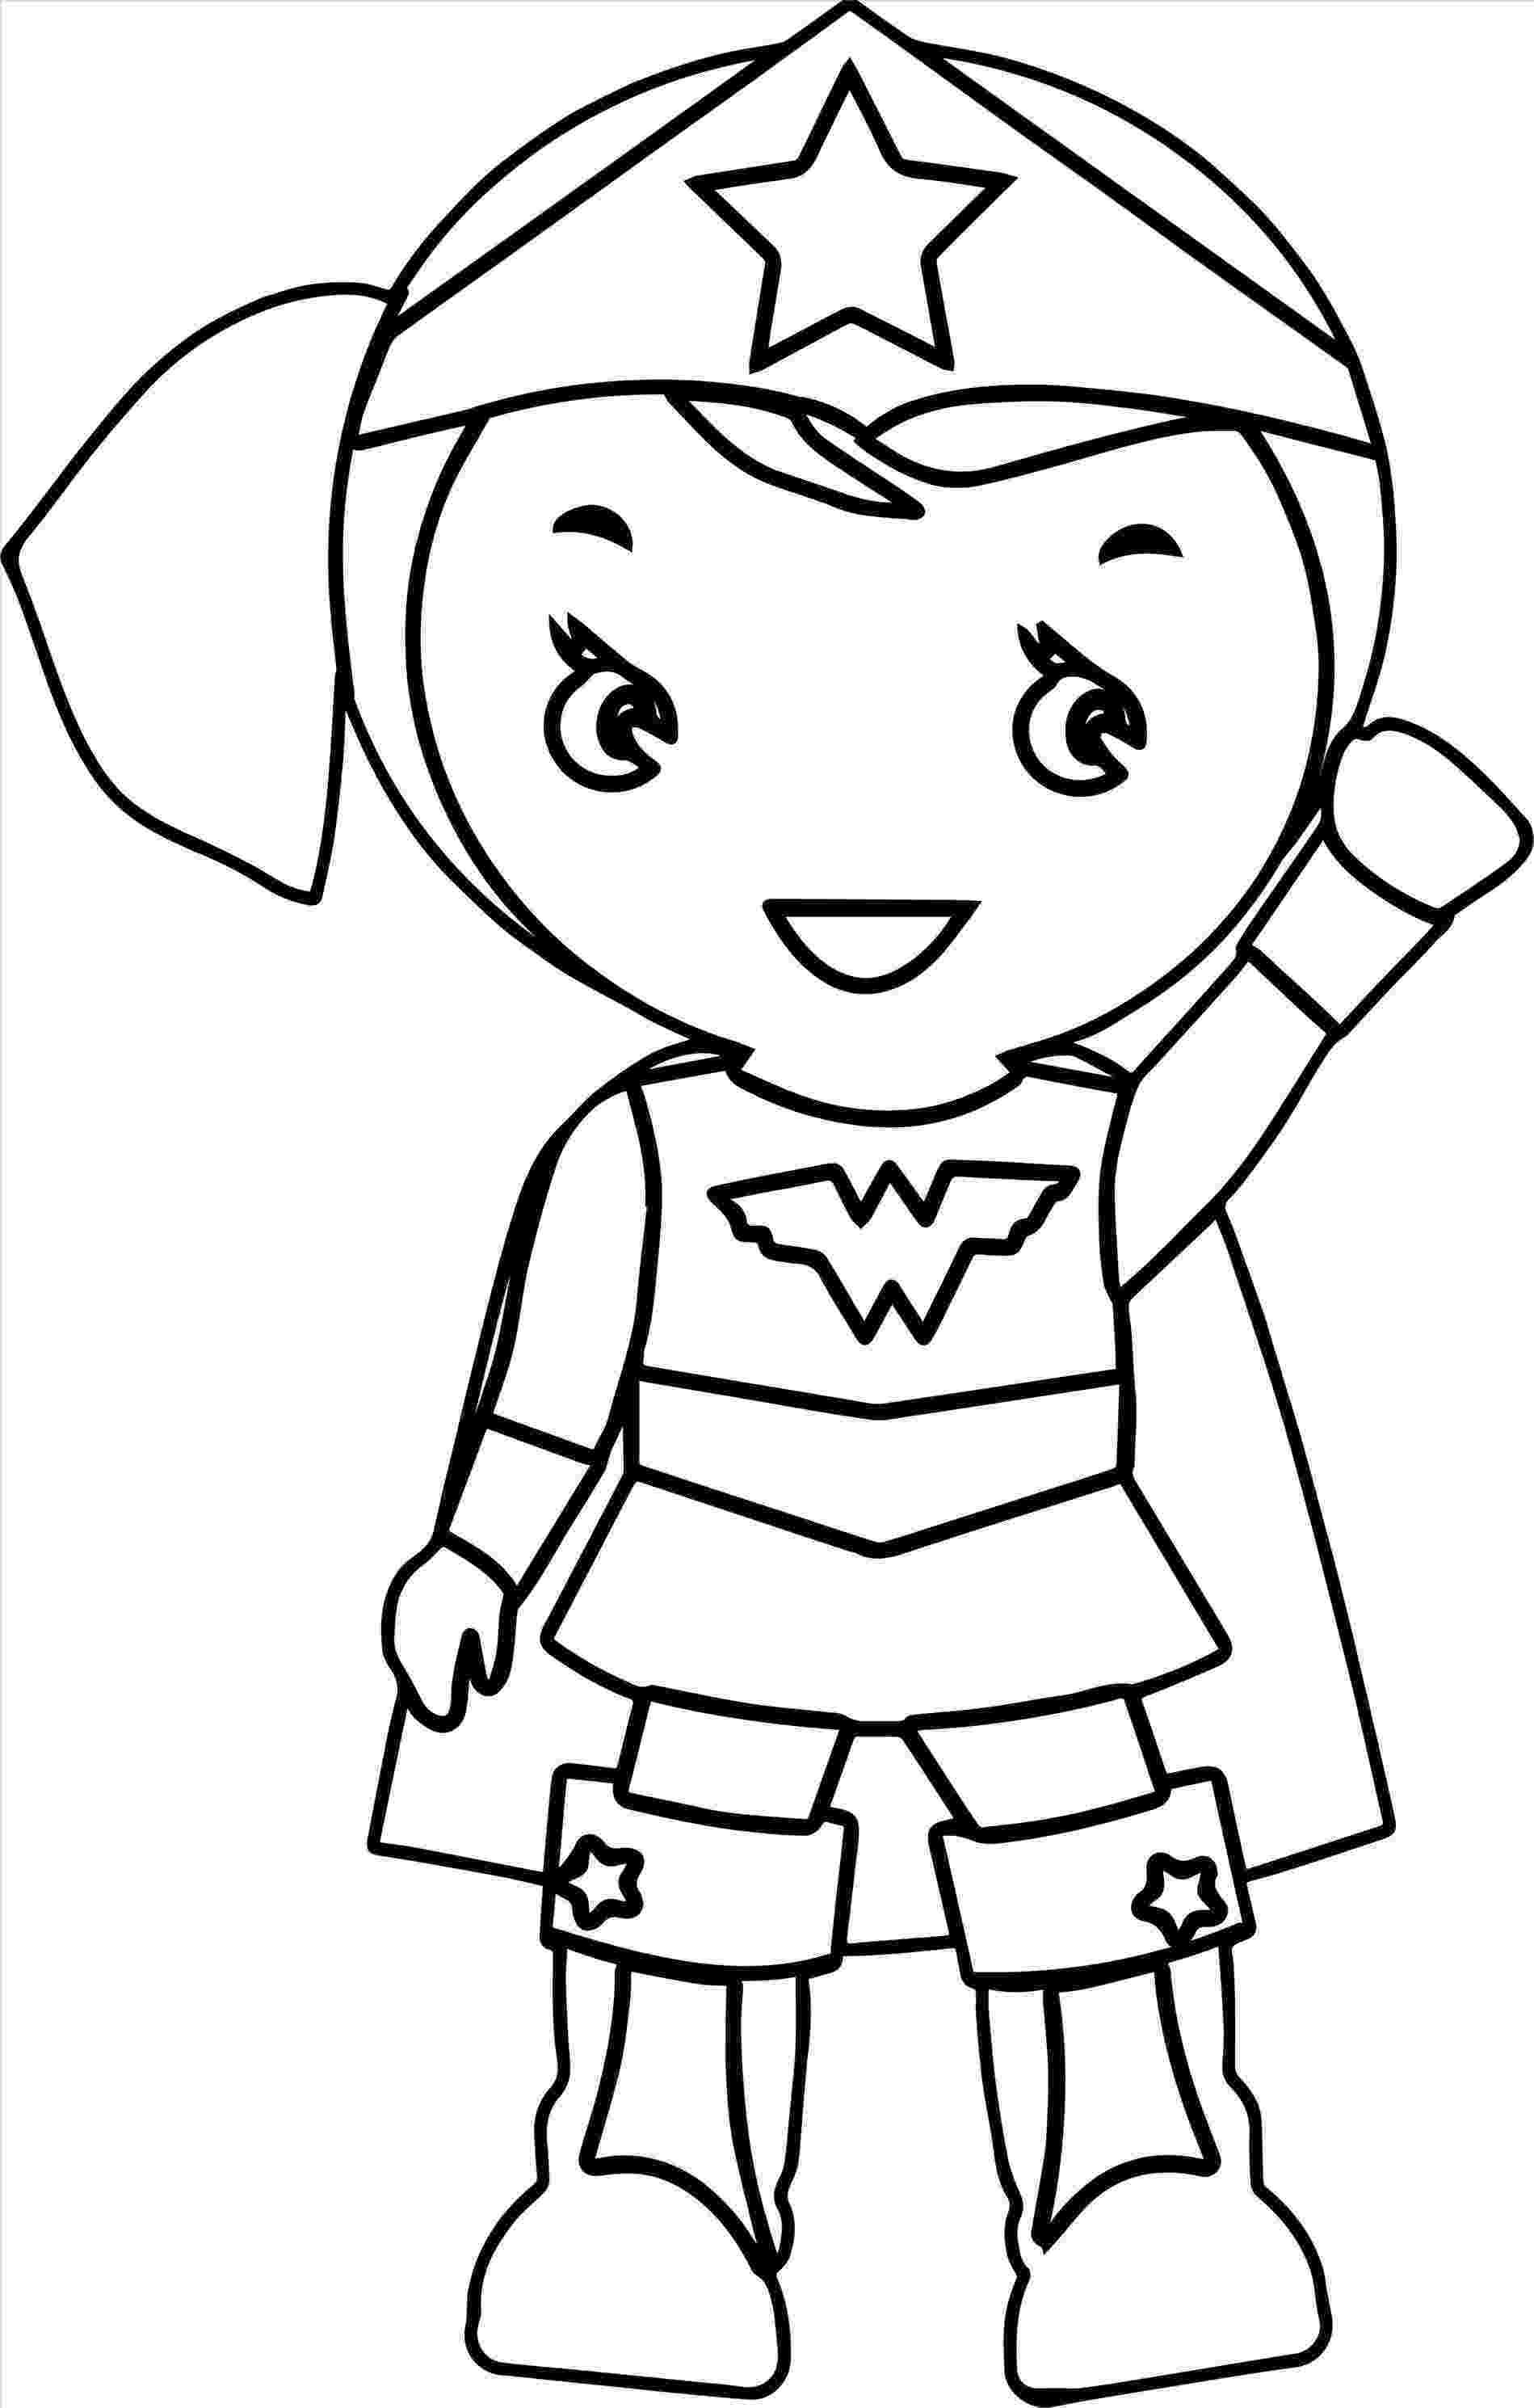 coloring pages for wonder woman fun coloring pages wonder woman coloring pages pages for coloring woman wonder 